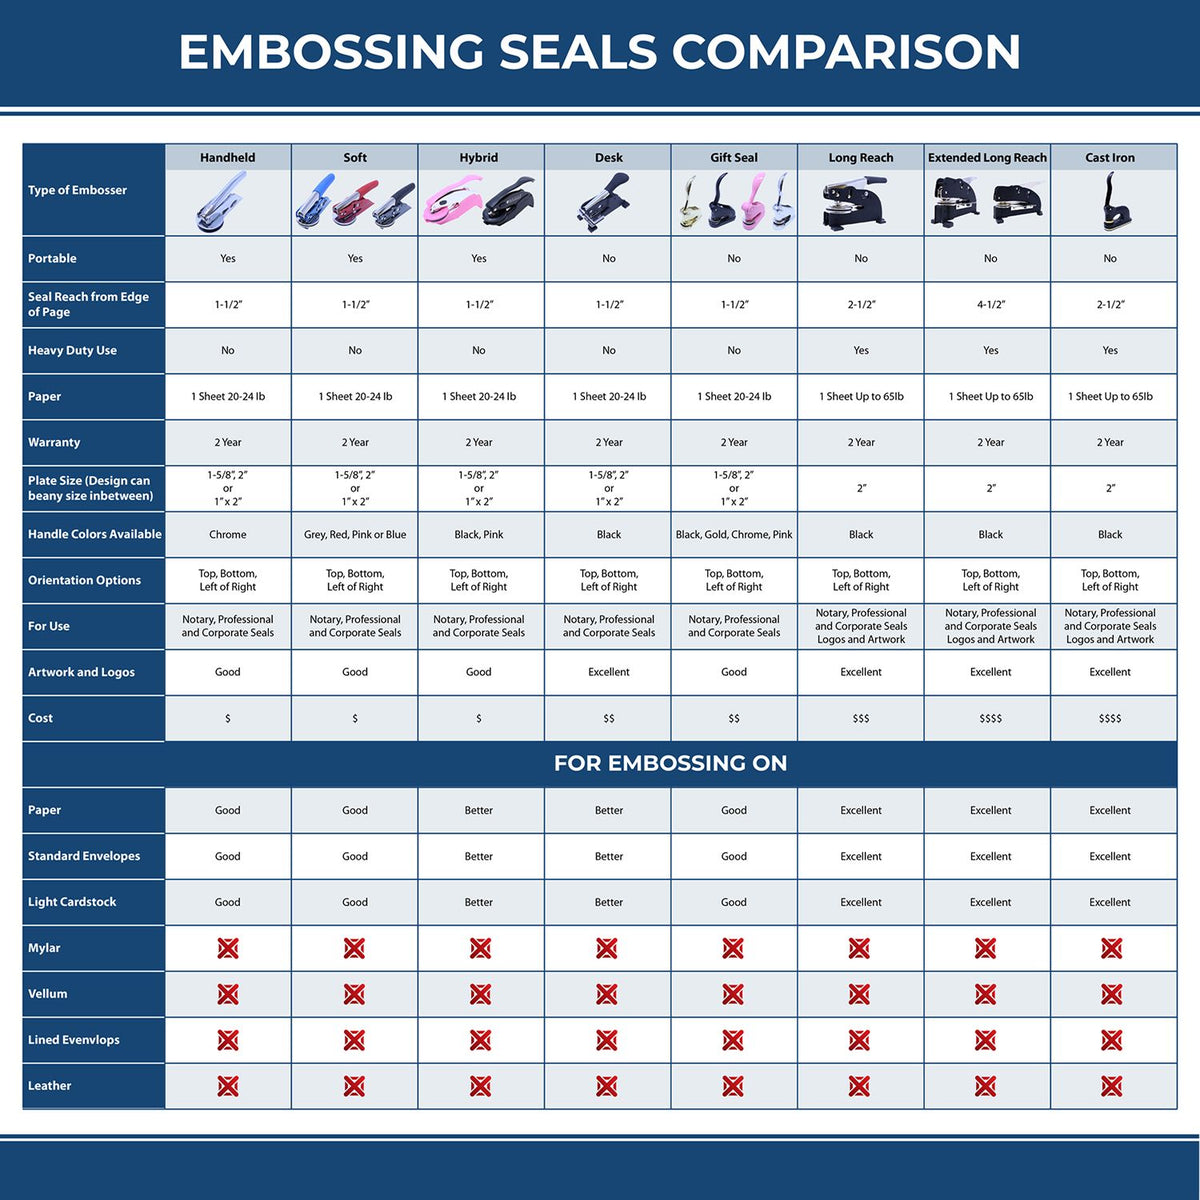 A comparison chart for the different types of mount models available for the State of Texas Soft Land Surveyor Embossing Seal.